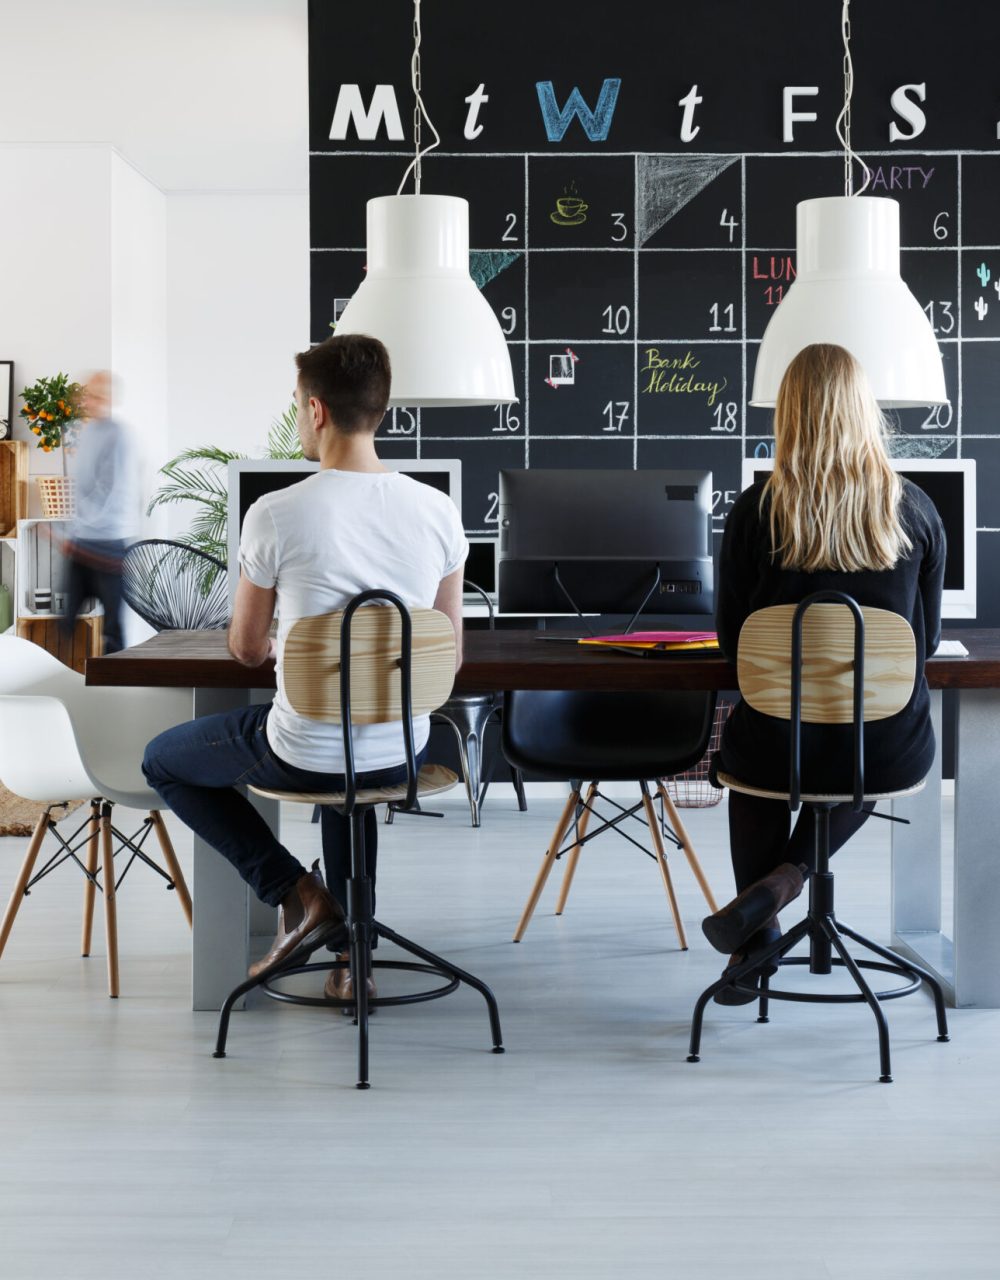 Modern coworking space in black and white for freelancer